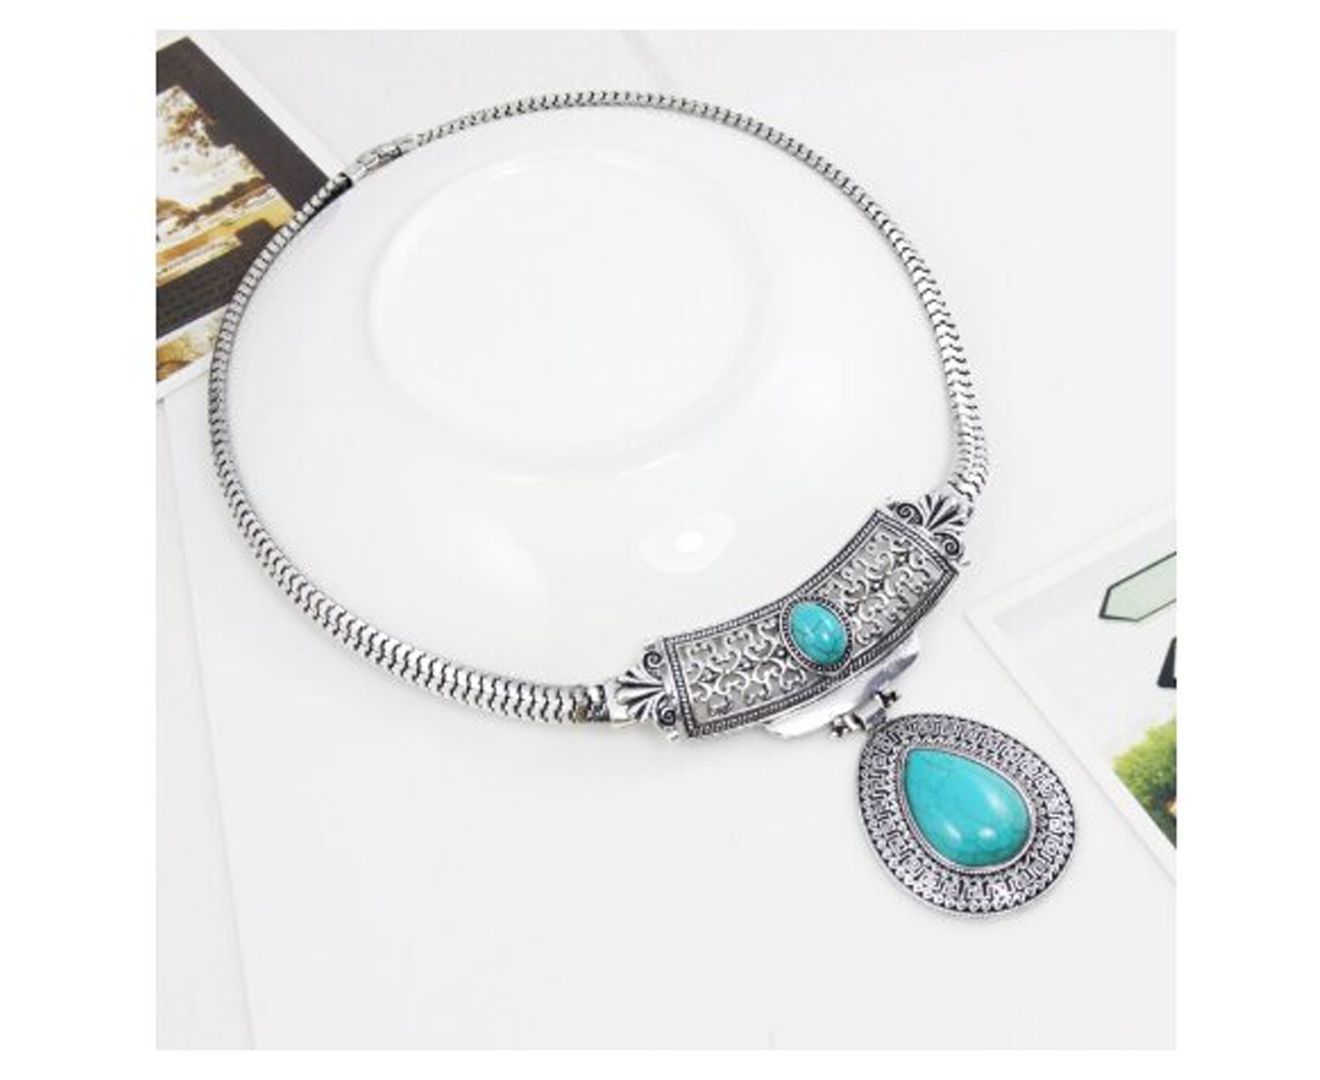 Chunky Vintage-Style Turquoise Necklace